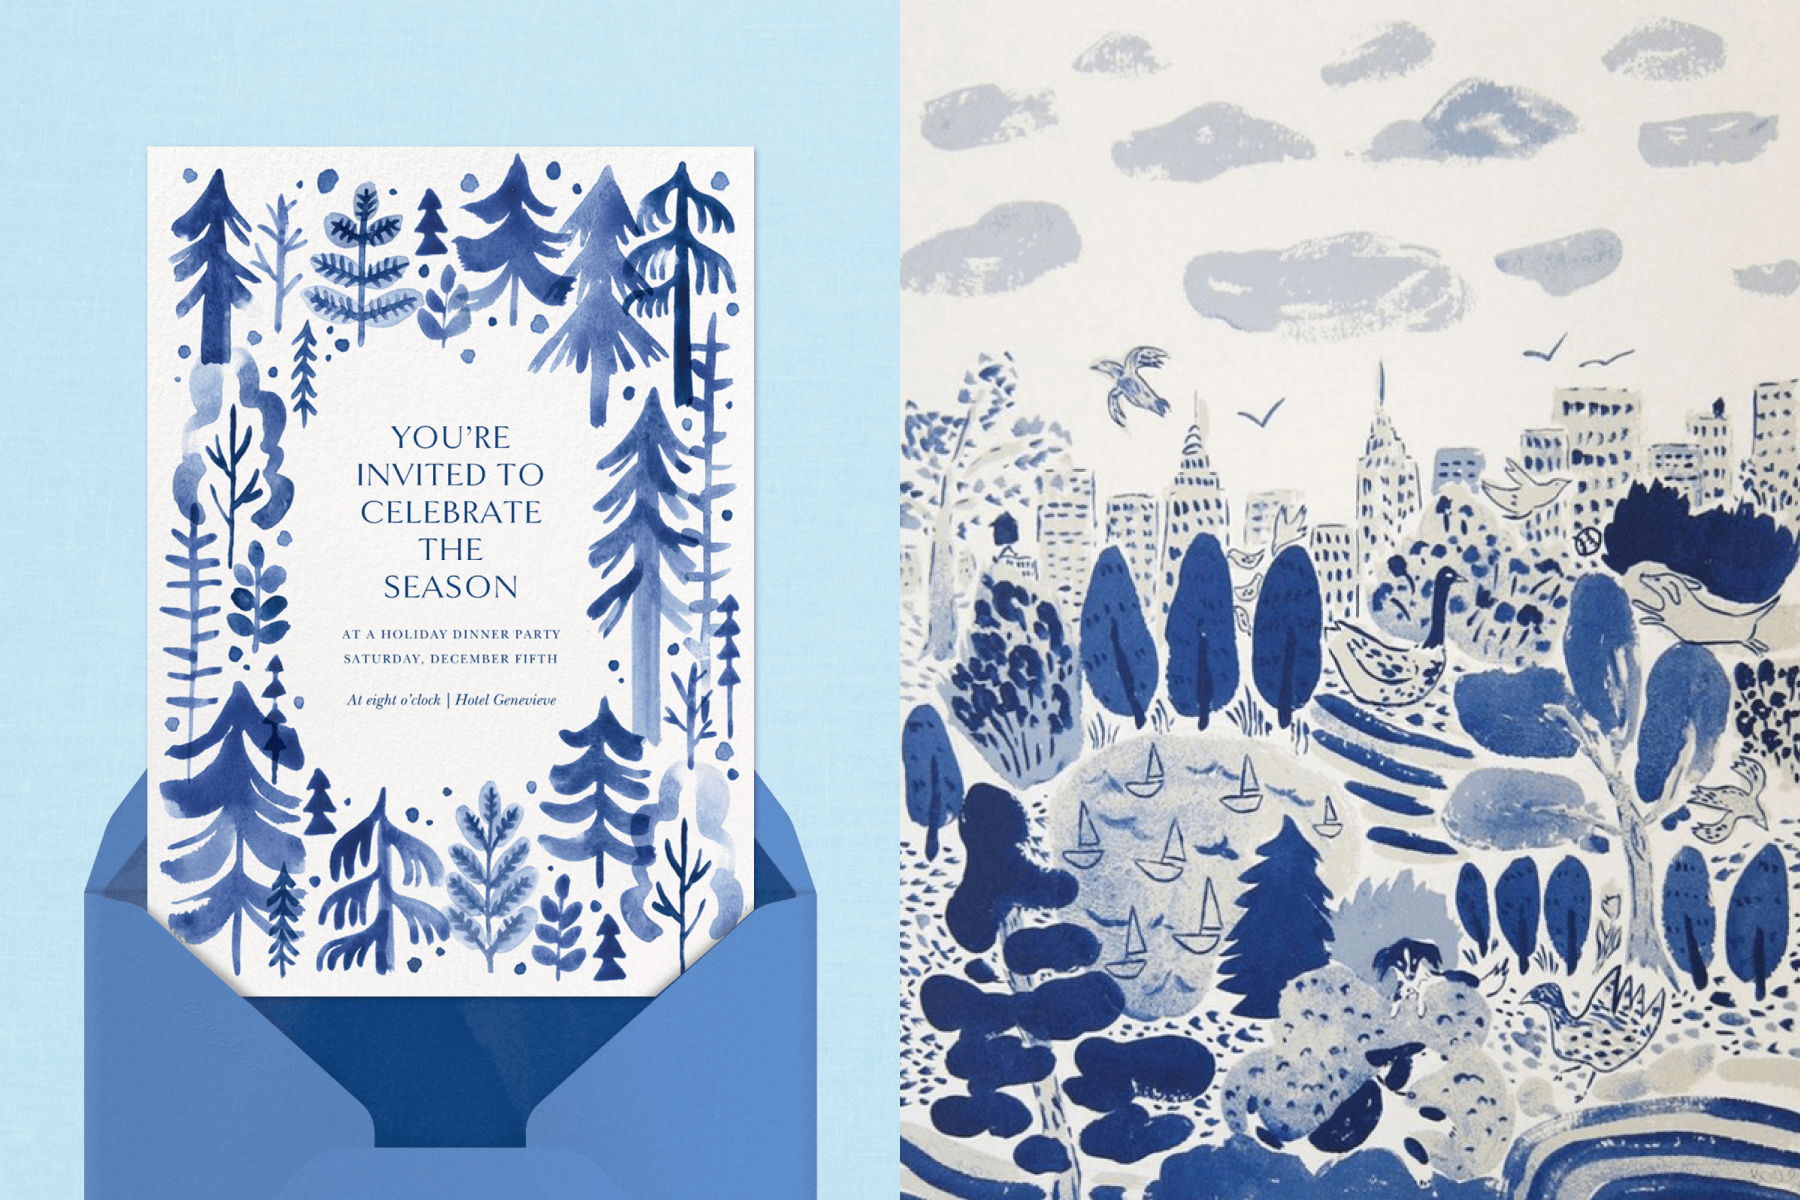 left: A white holiday card with blue watercolor paintings around the border of evergreen trees. Right: A whimsical blue watercolor painting of Central Park with the New York City skyline behind it and clouds in the sky.